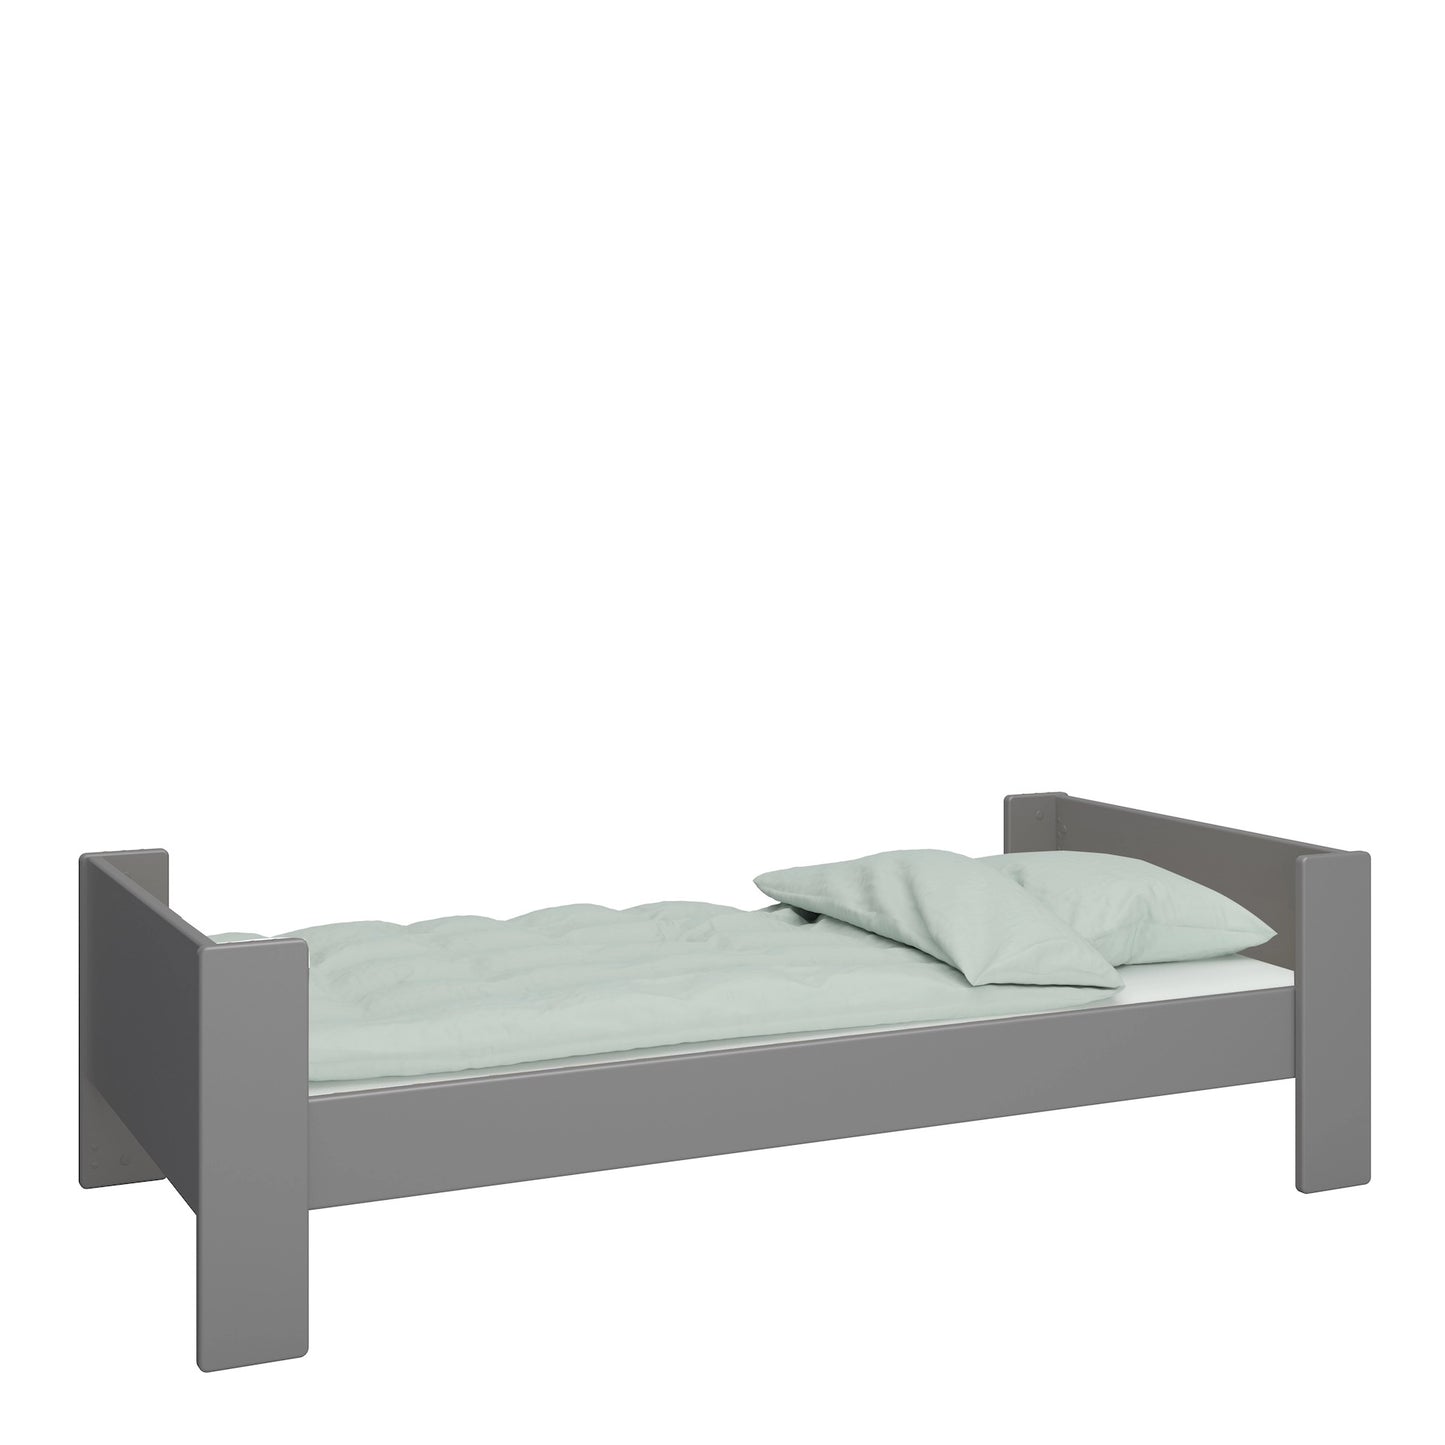 Furniture To Go Steens For Kids 3ft Single Bed Grey